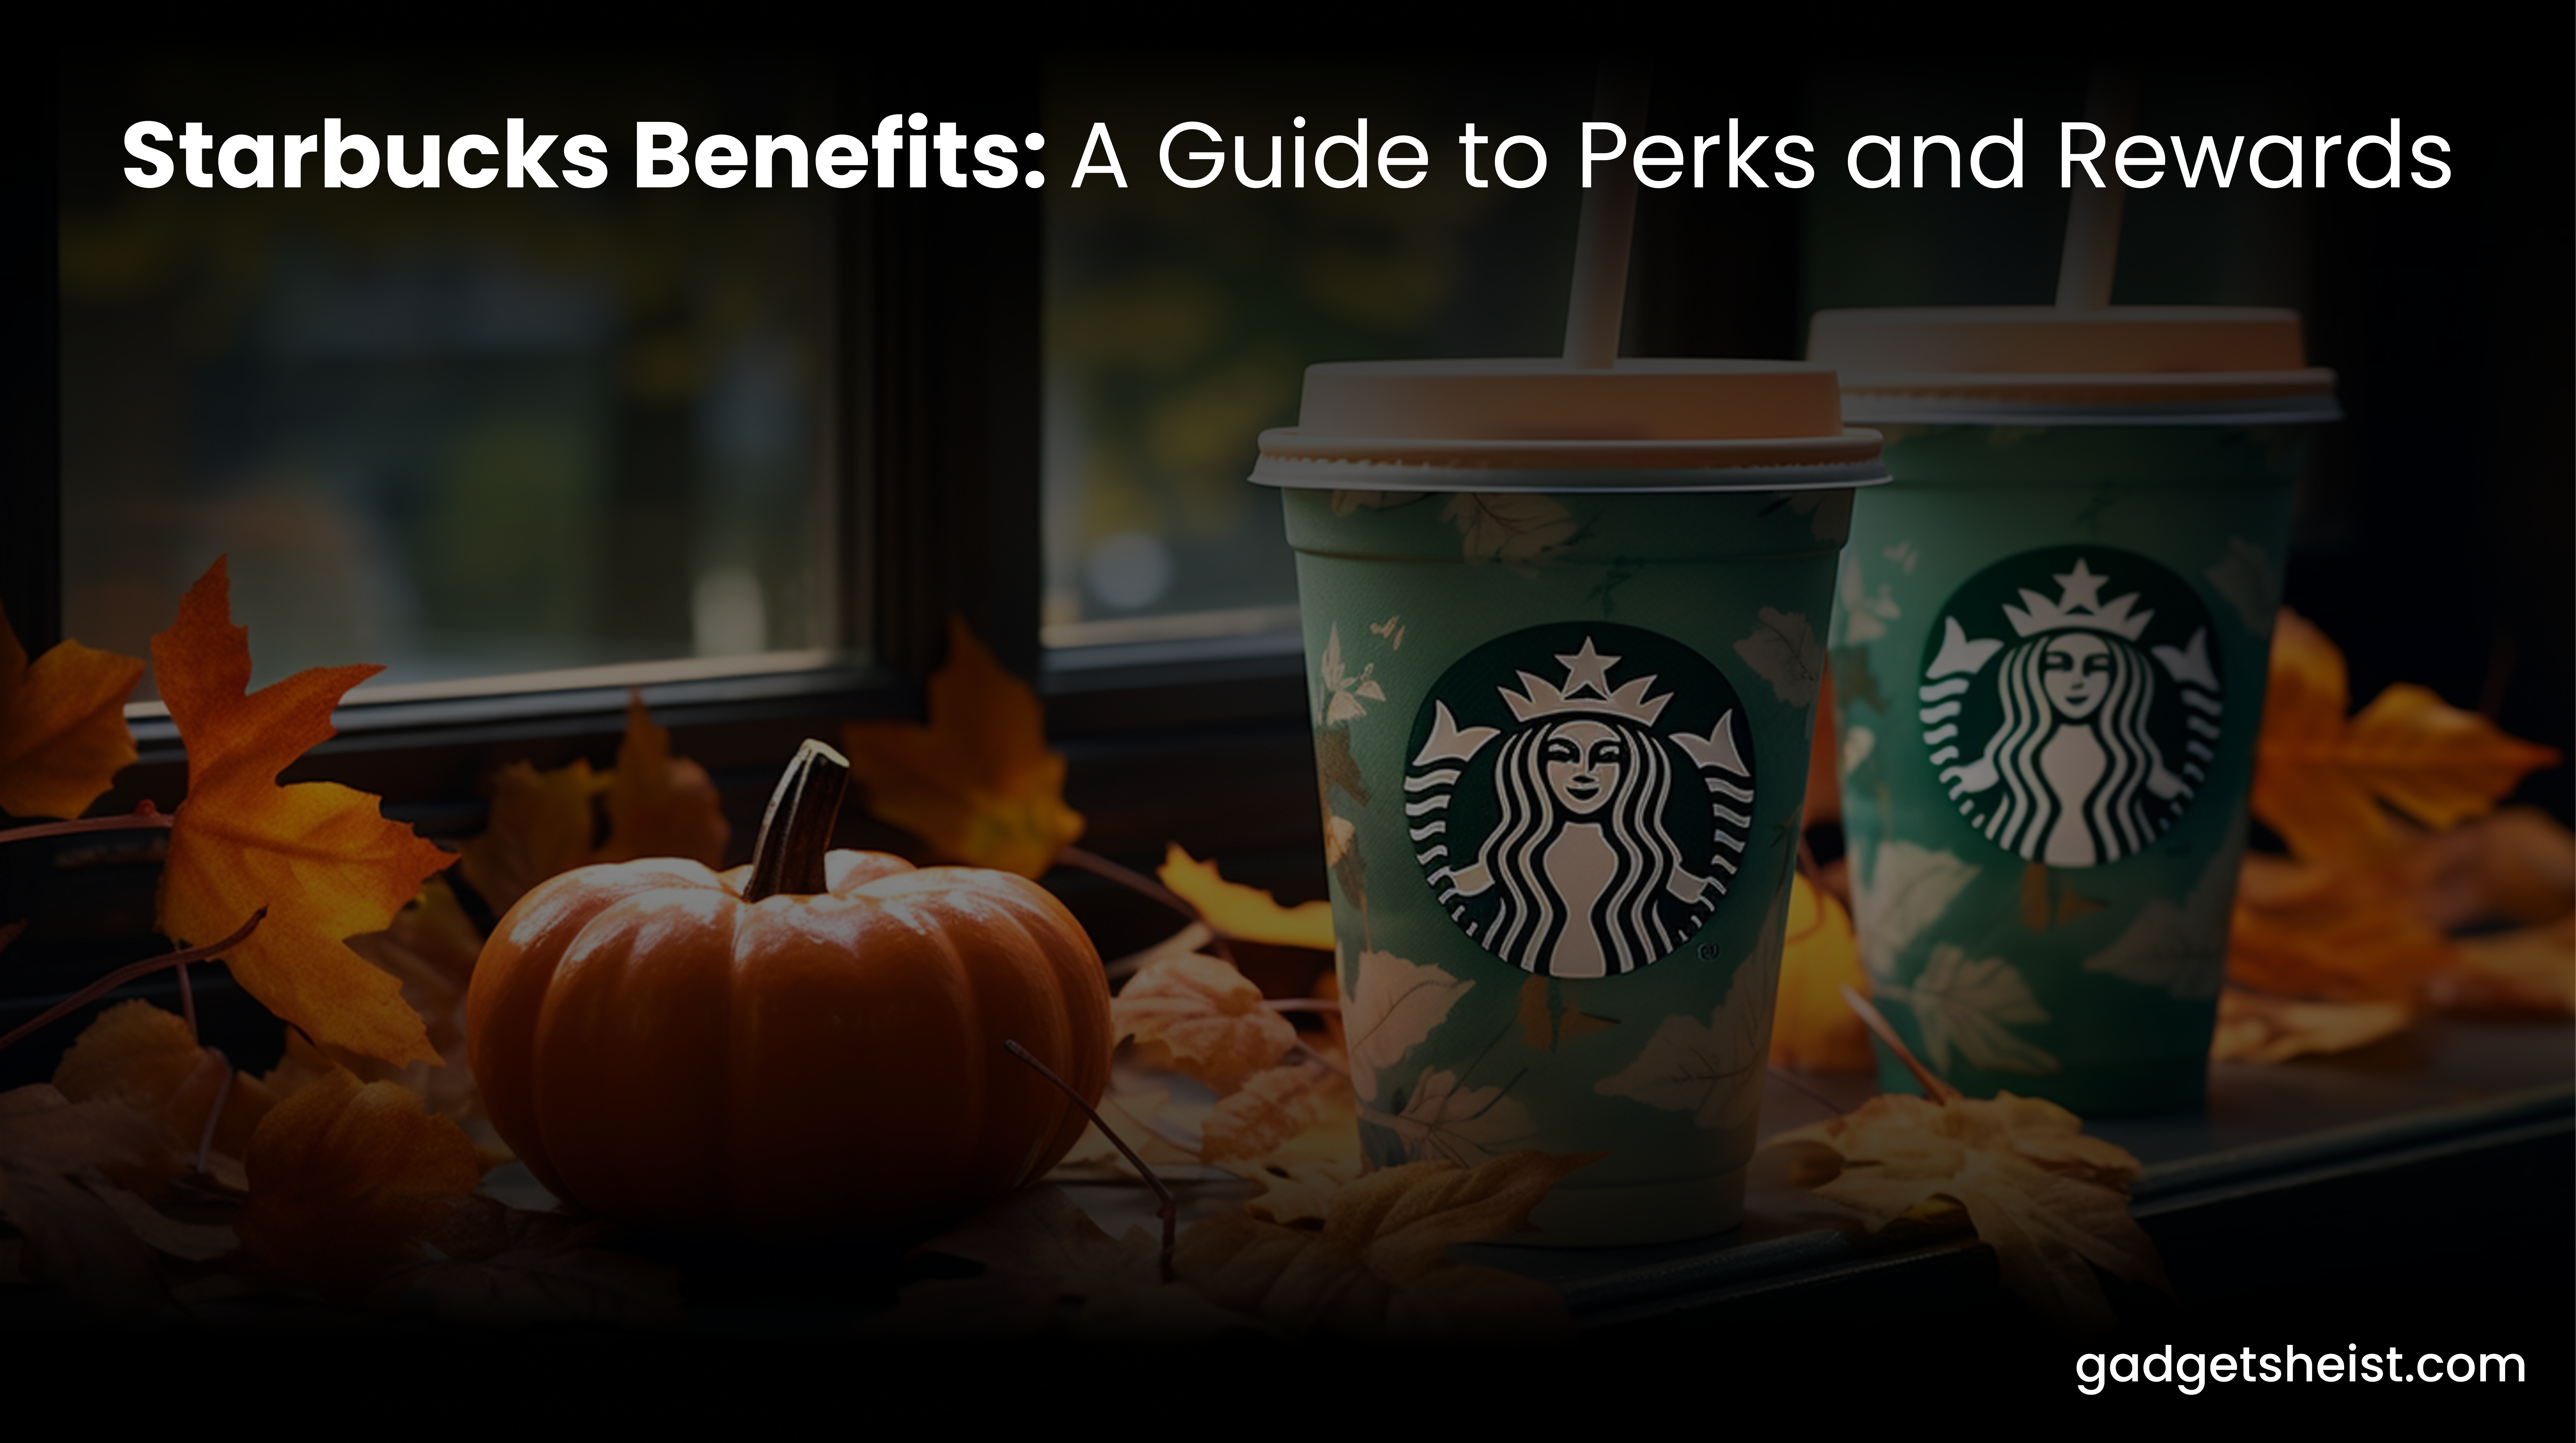 Starbucks Benefits: A Guide to Perks and Rewards